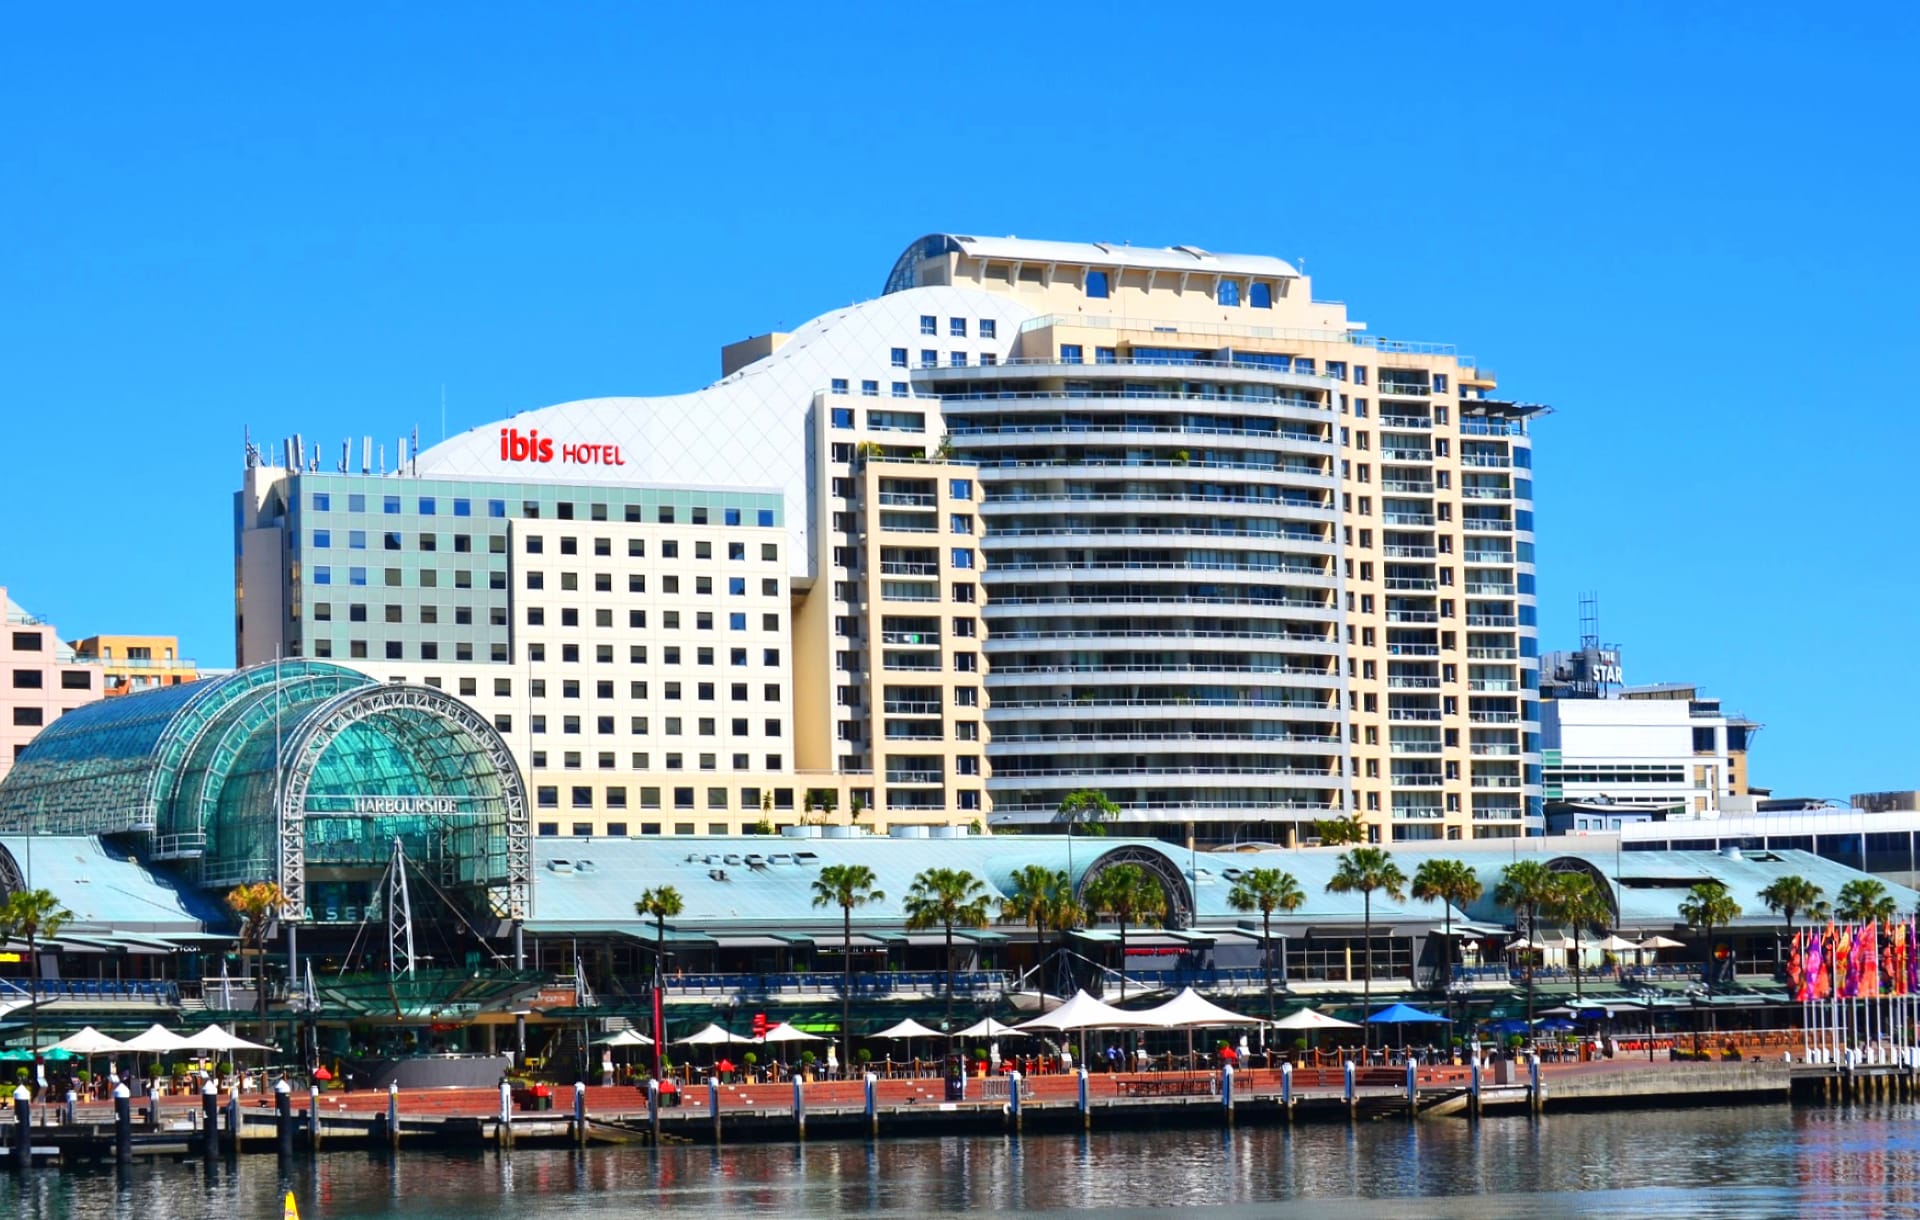 Ibis Sydney Hotel wallpapers HD quality